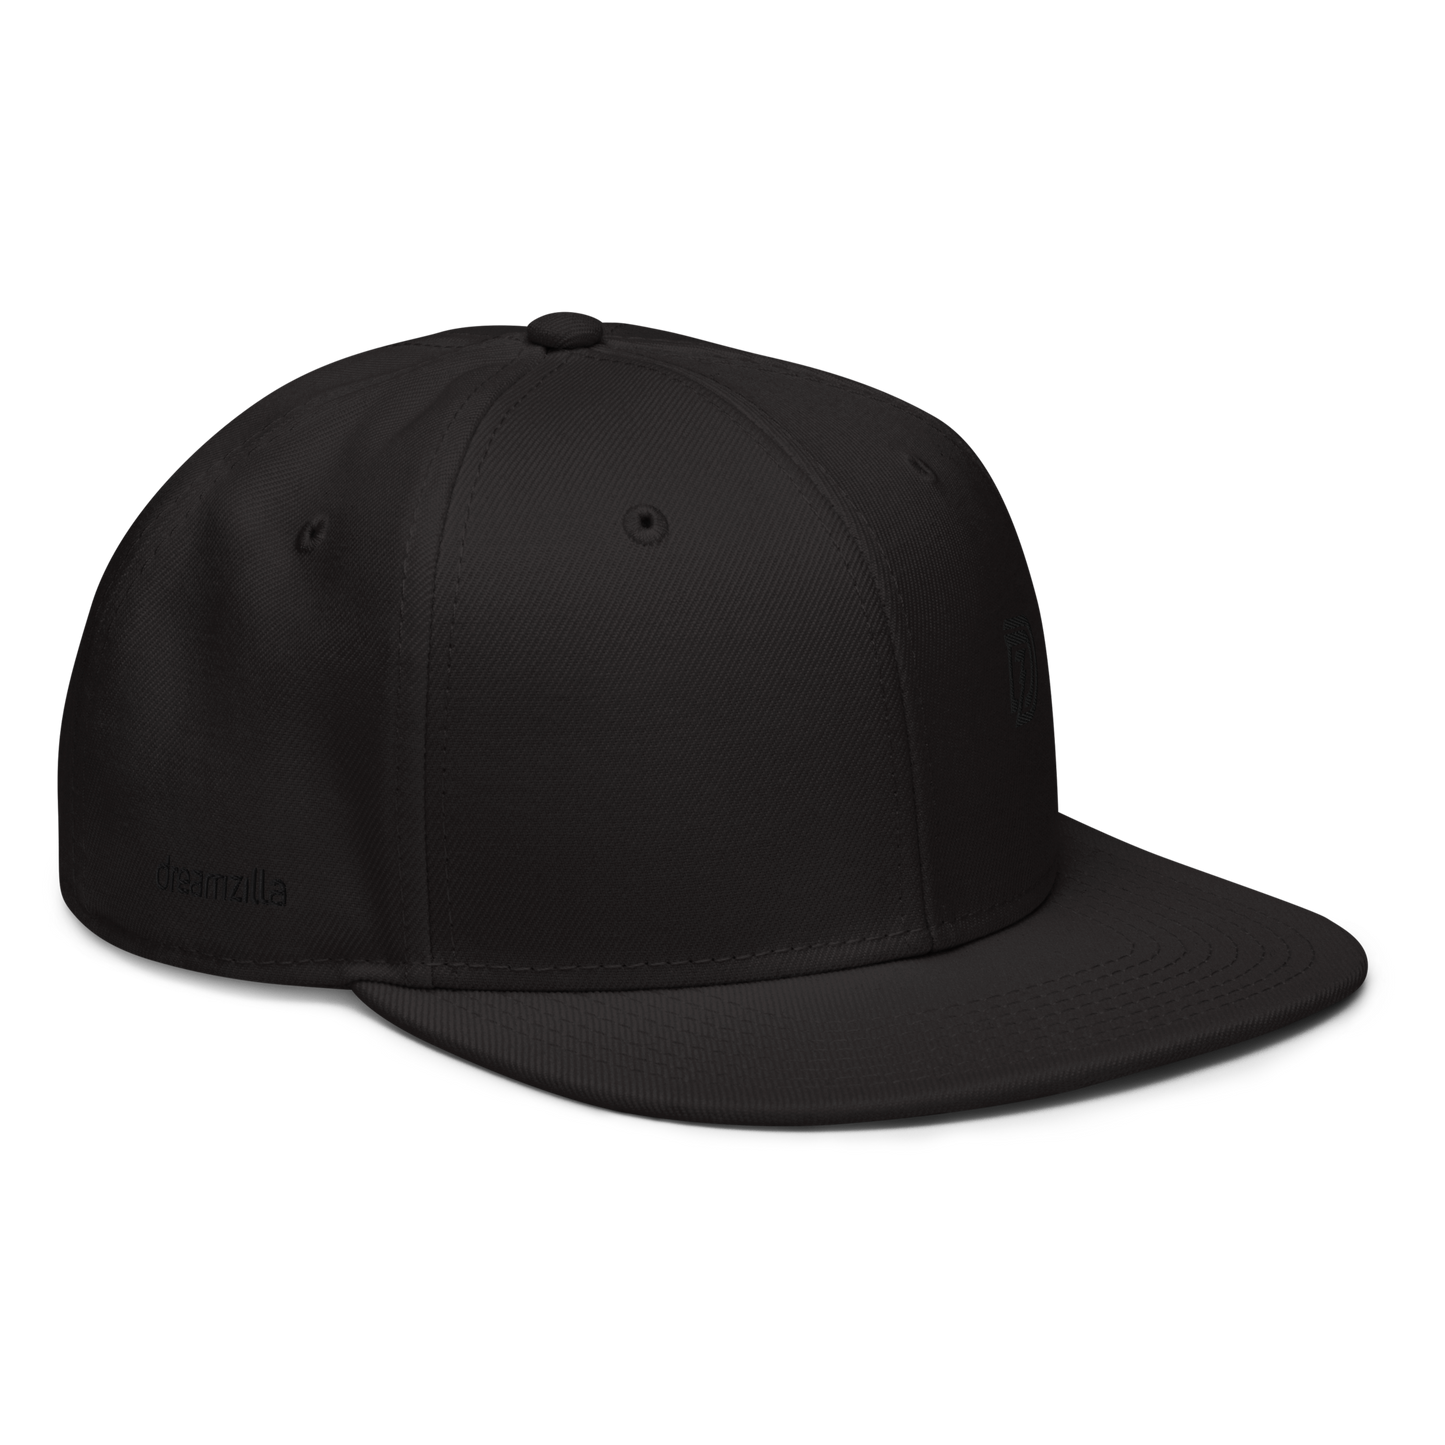 Angled View of DZ Monochrome Snapback in Black